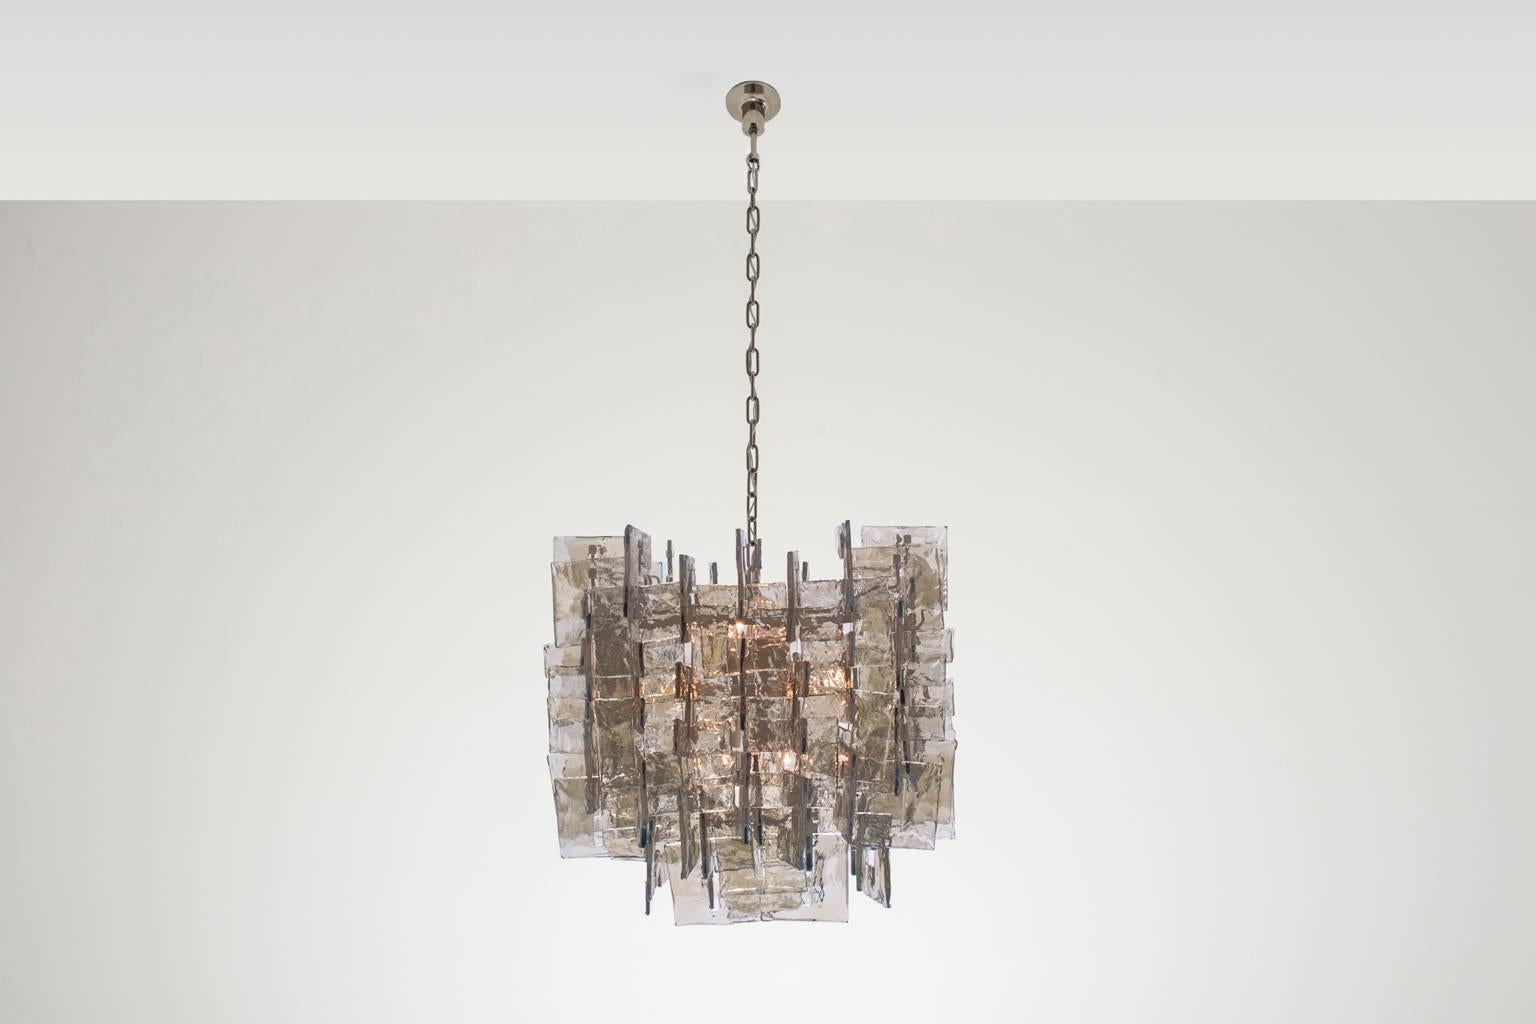 Impressive Murano glass chandelier by Carlo Nason for Mazzega, Italy 1970s. The chandelier contains 128 handmade Artistic glass pieces with a nice structure, including 2 spare ones. The C-shaped glass pieces hangs on a white lacquered square frame,